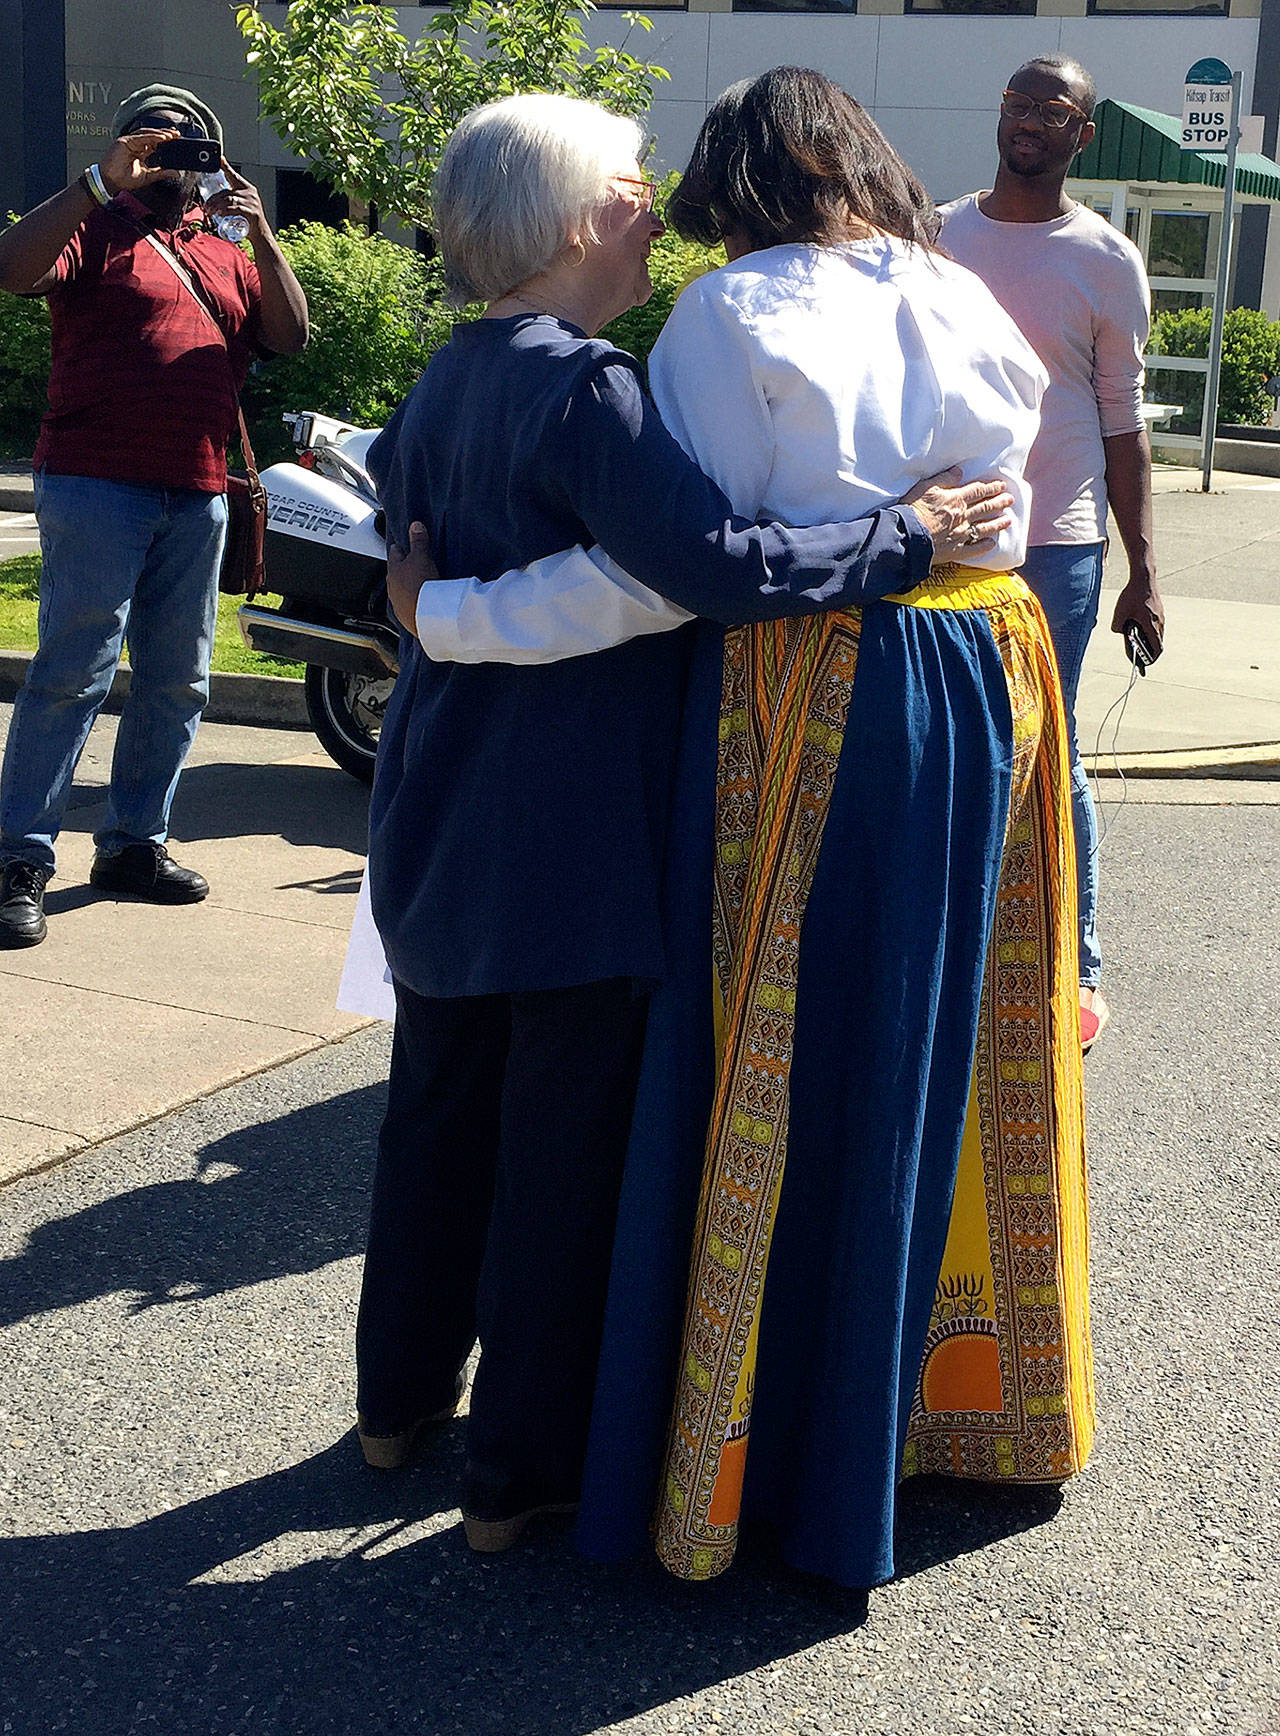 Following her rendition of “Amazing Grace,” Willie Mae Sharpe receives a hug from Charlotte Garrido, Kitsap County commissioner. Garrido gave welcoming remarks at the start of the event. Photo: Bob Smith | Kitsap Daily News